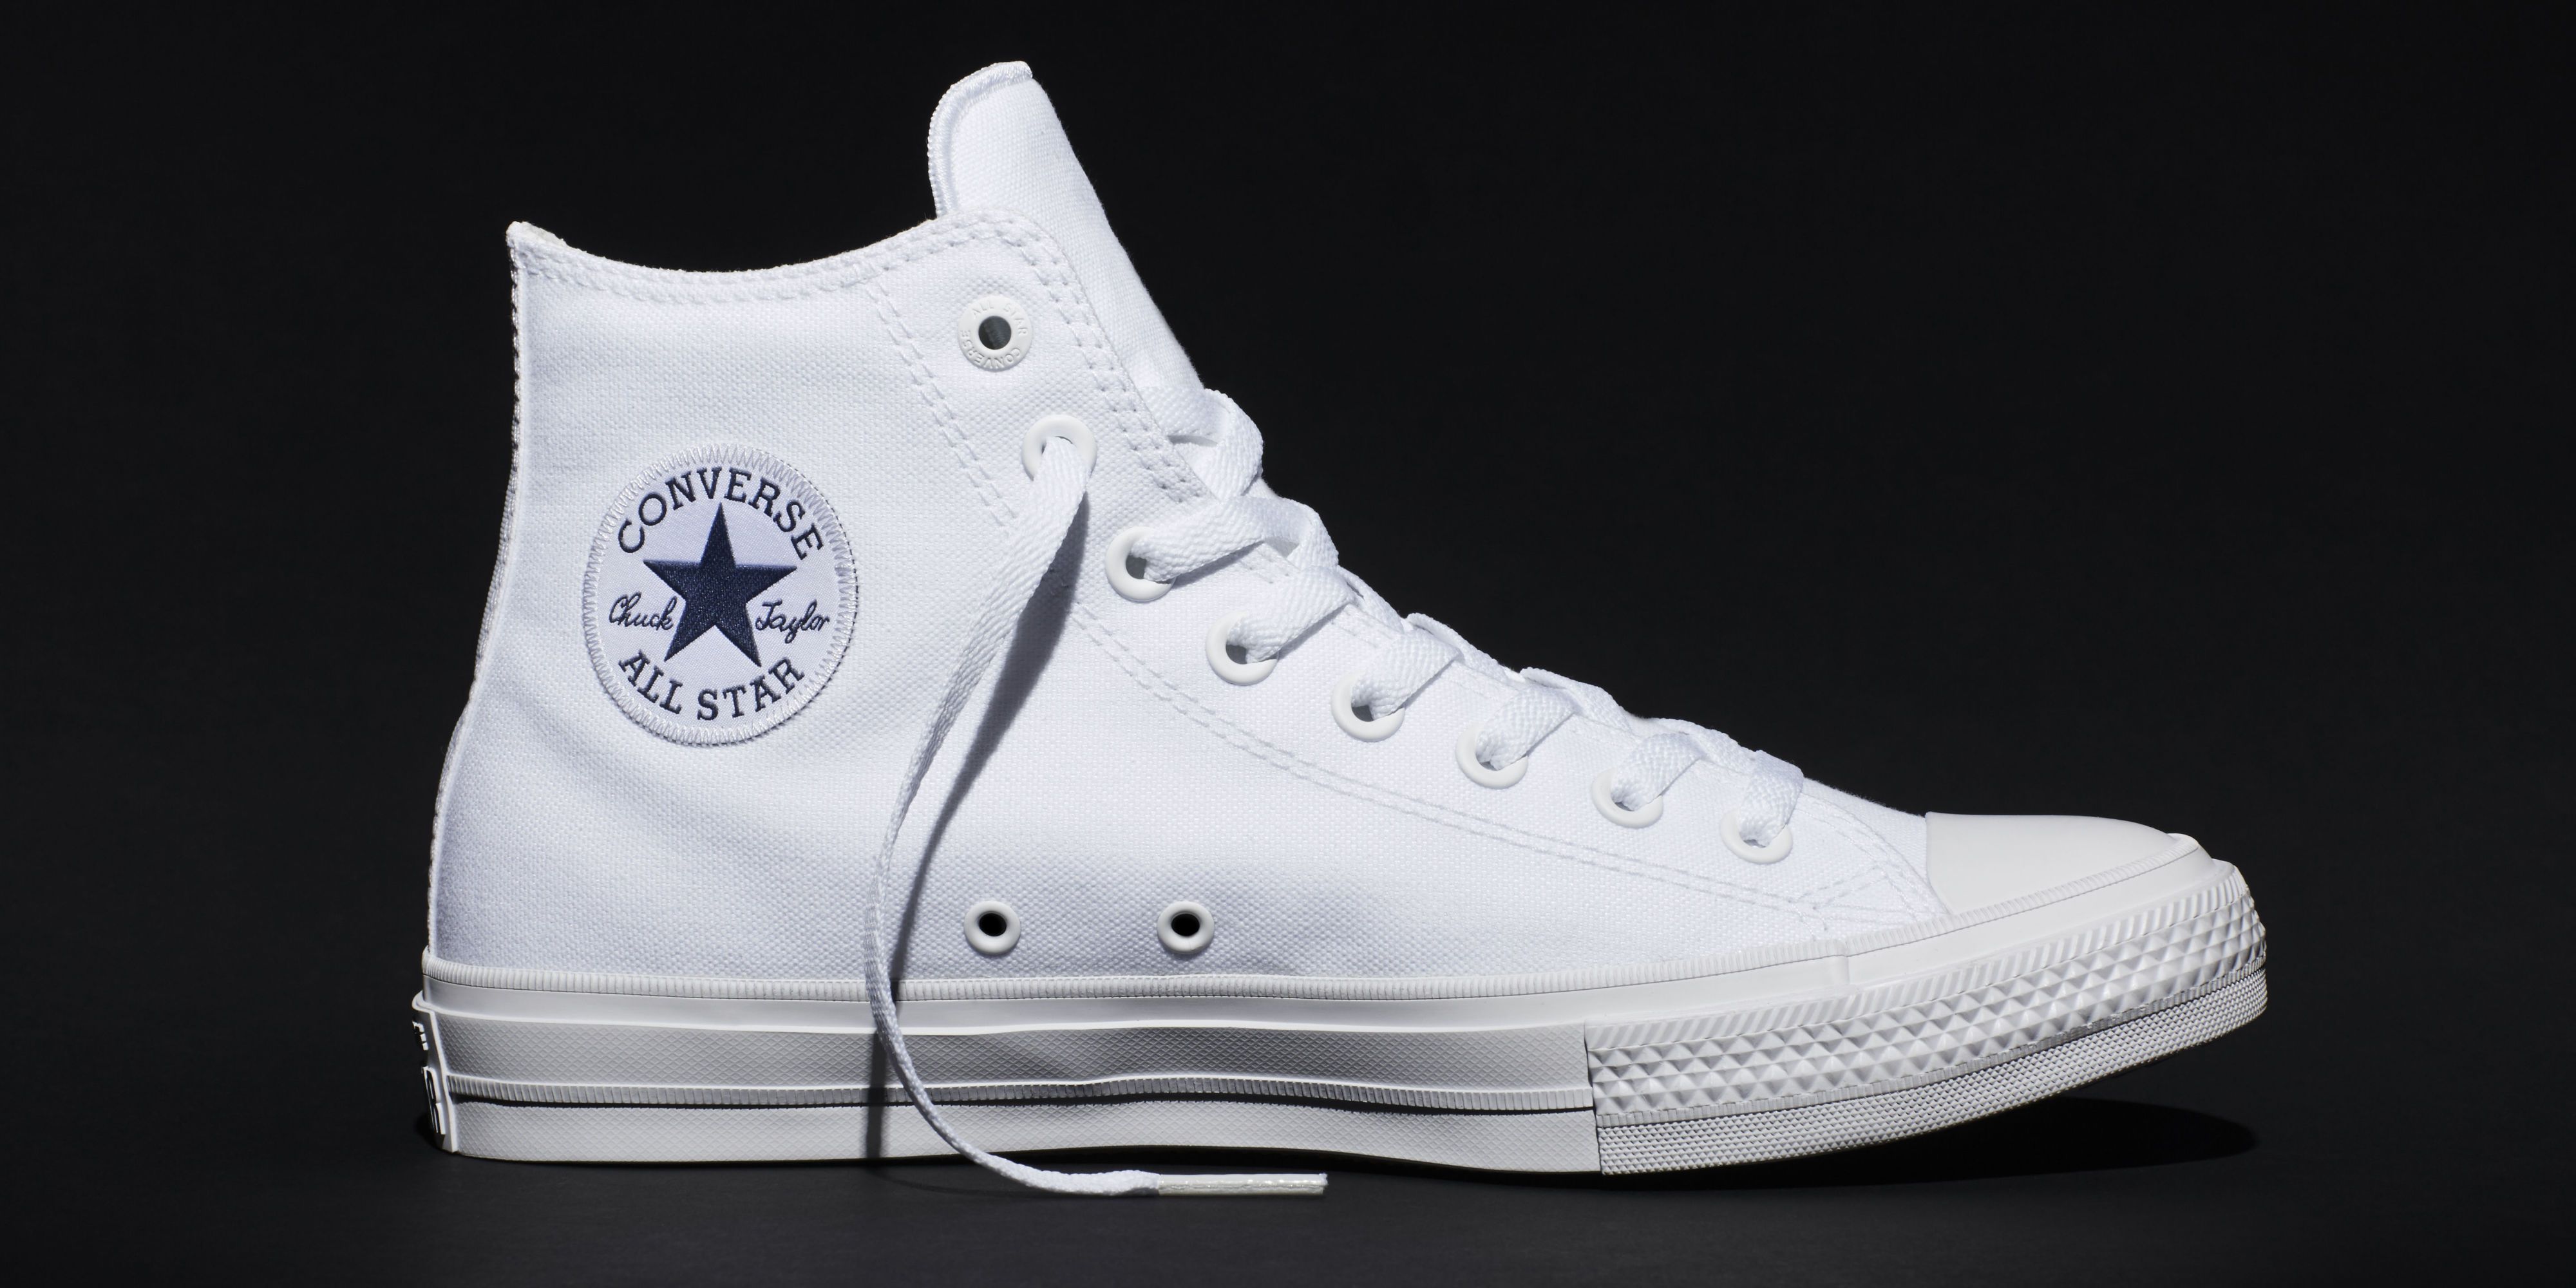 converse all star 2 discontinued 